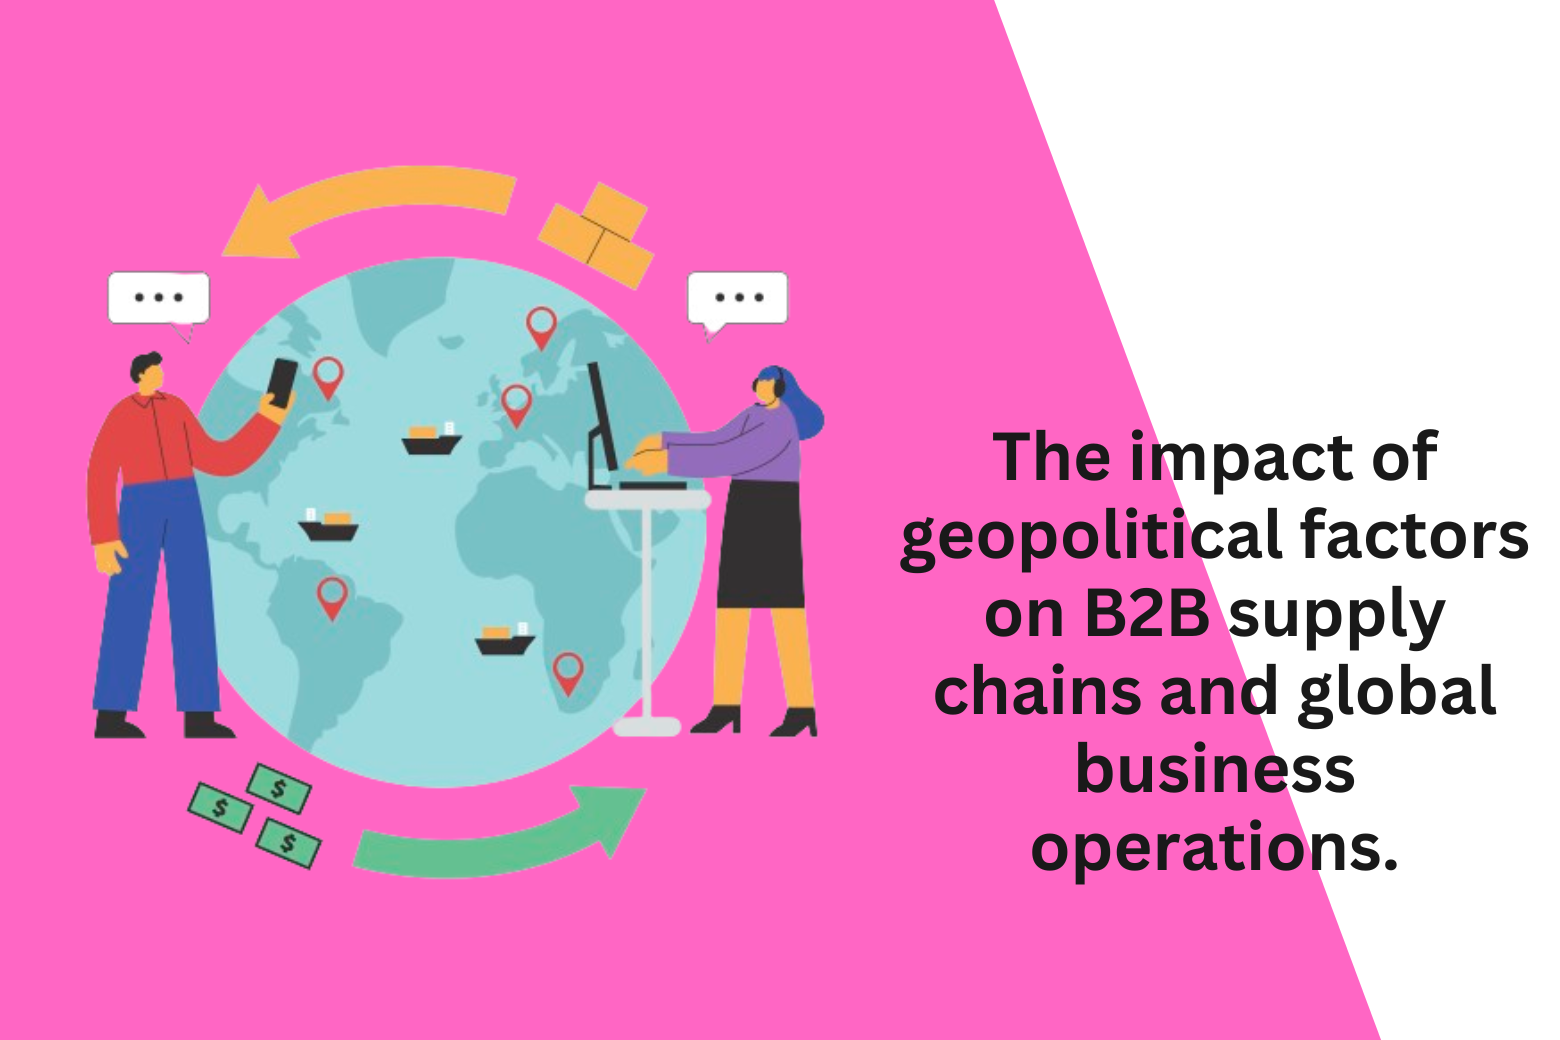 The impact of geopolitical factors on B2B supply chains and global business operations.